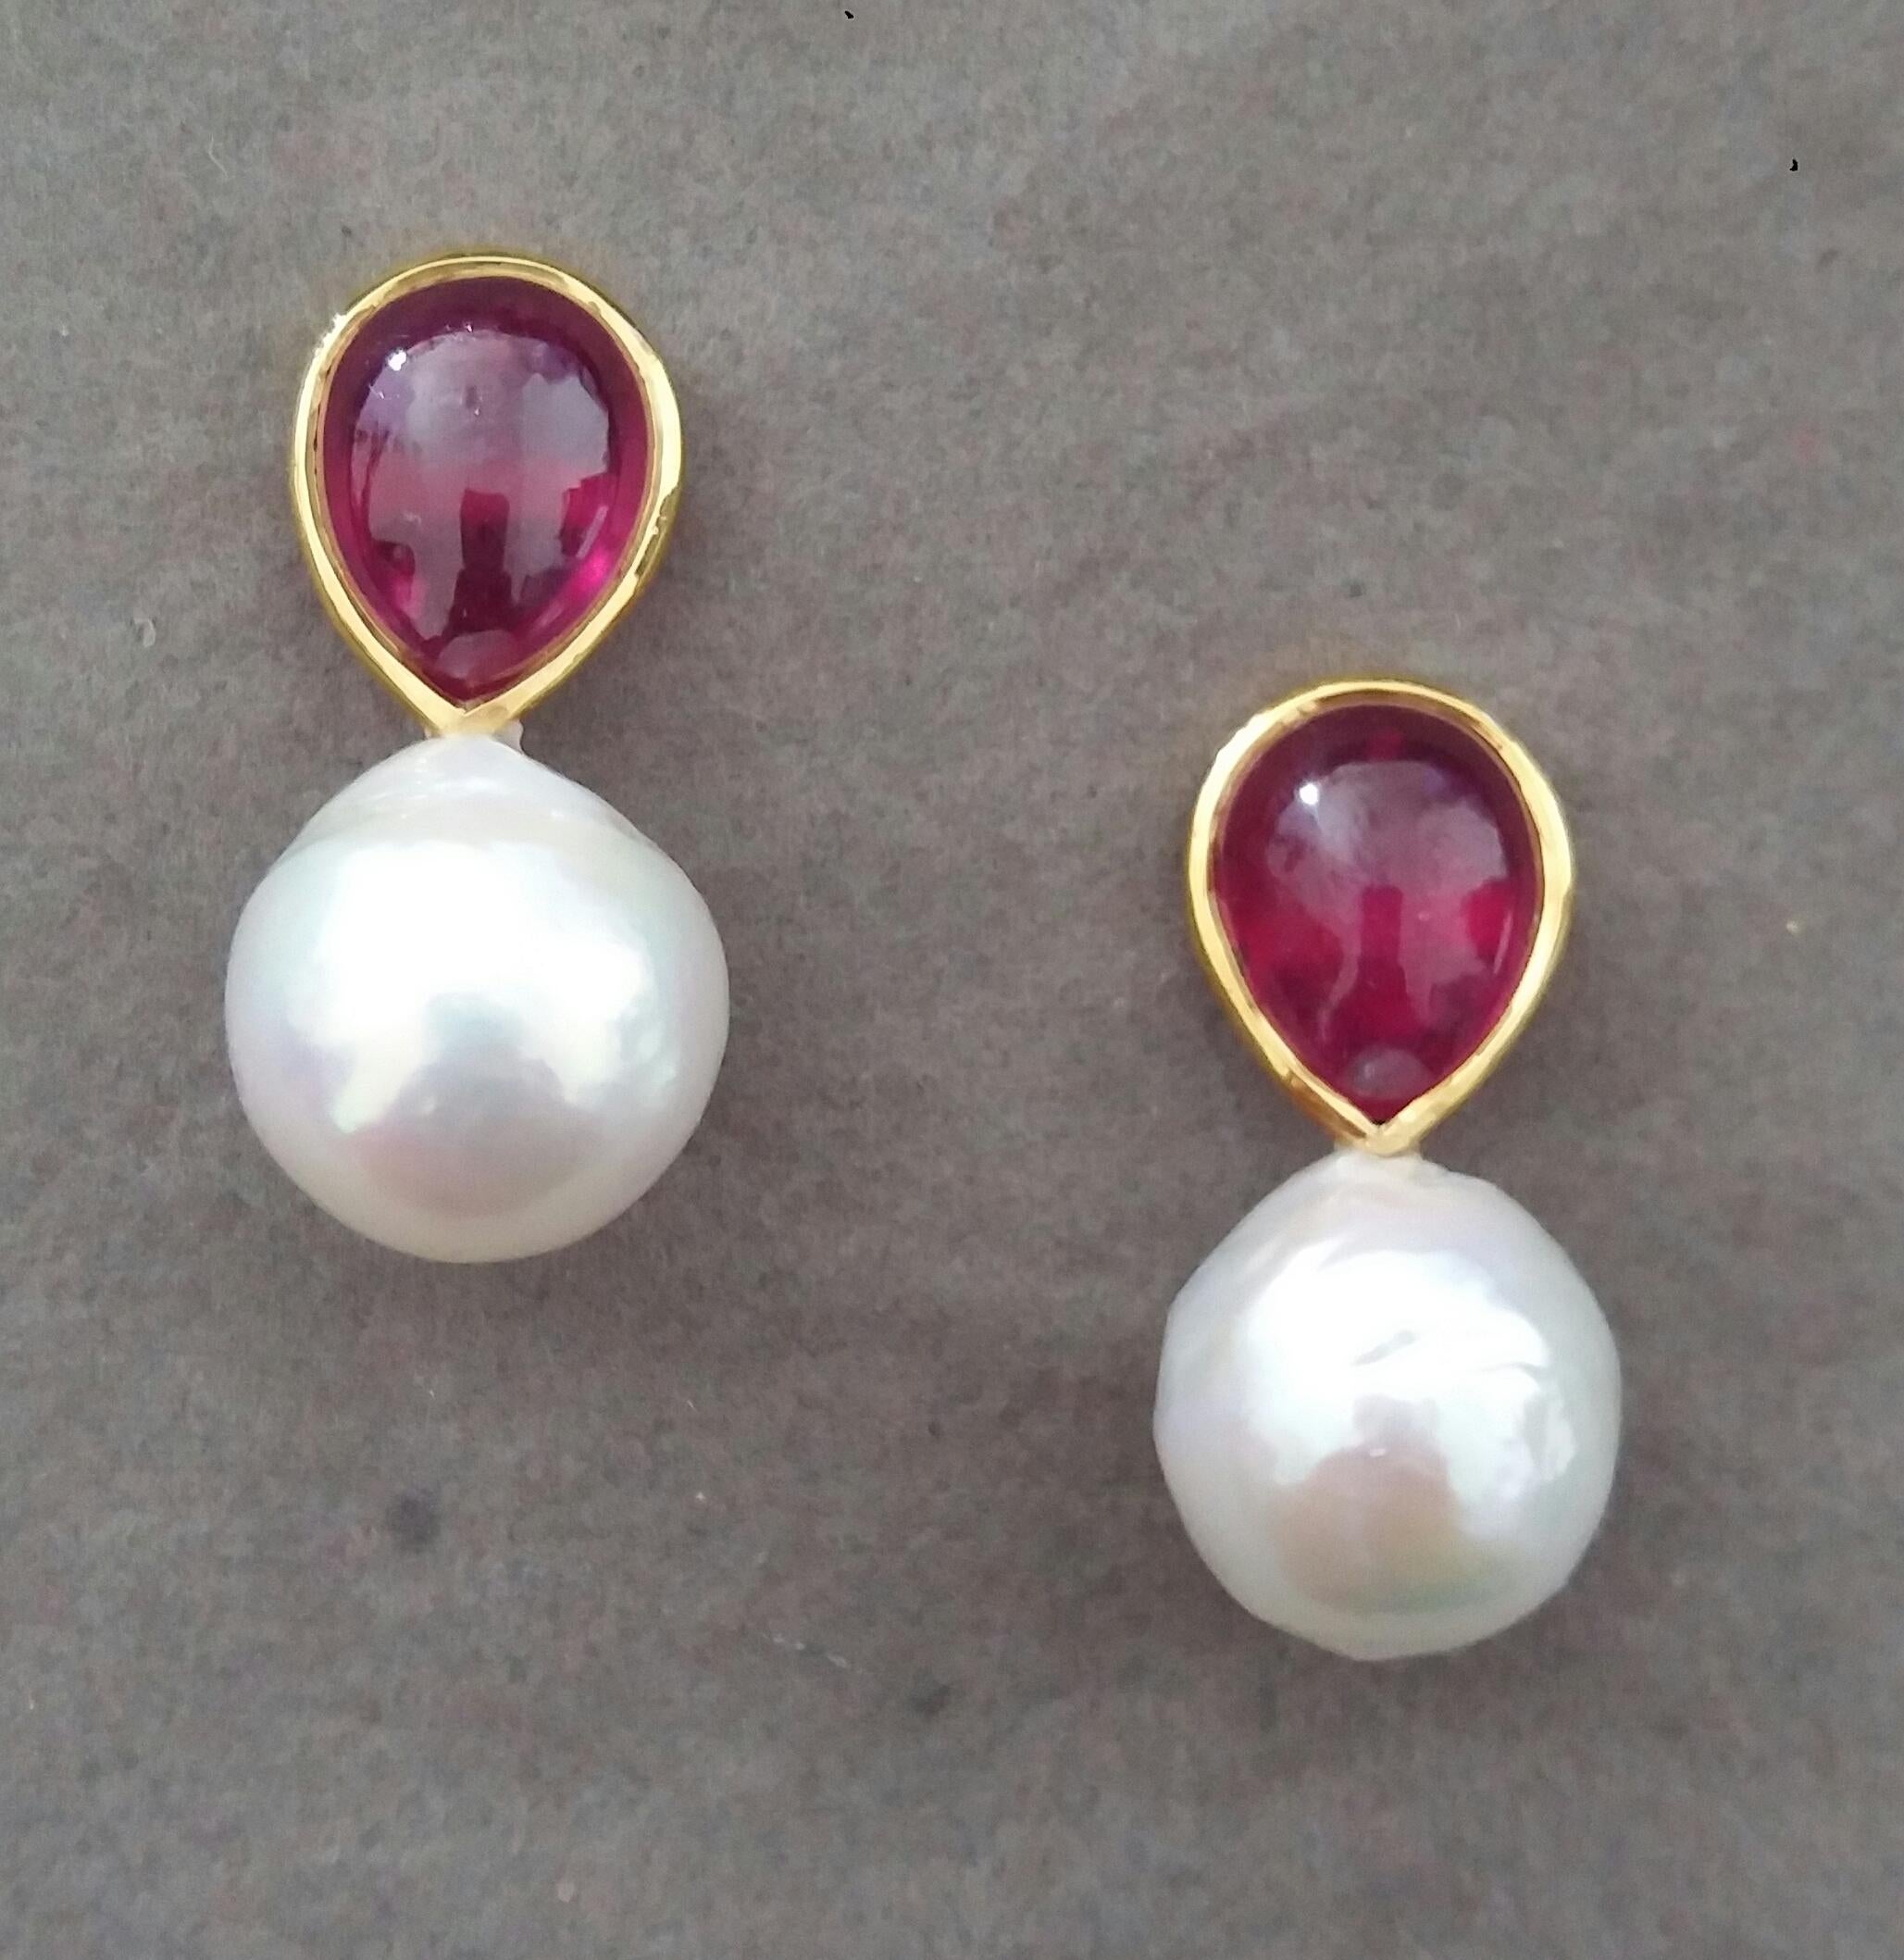 Pear Cut White Baroque Pearls Pear Shape Ruby Cabs 14 Kt Yellow Gold Bezel Stud Earrings For Sale